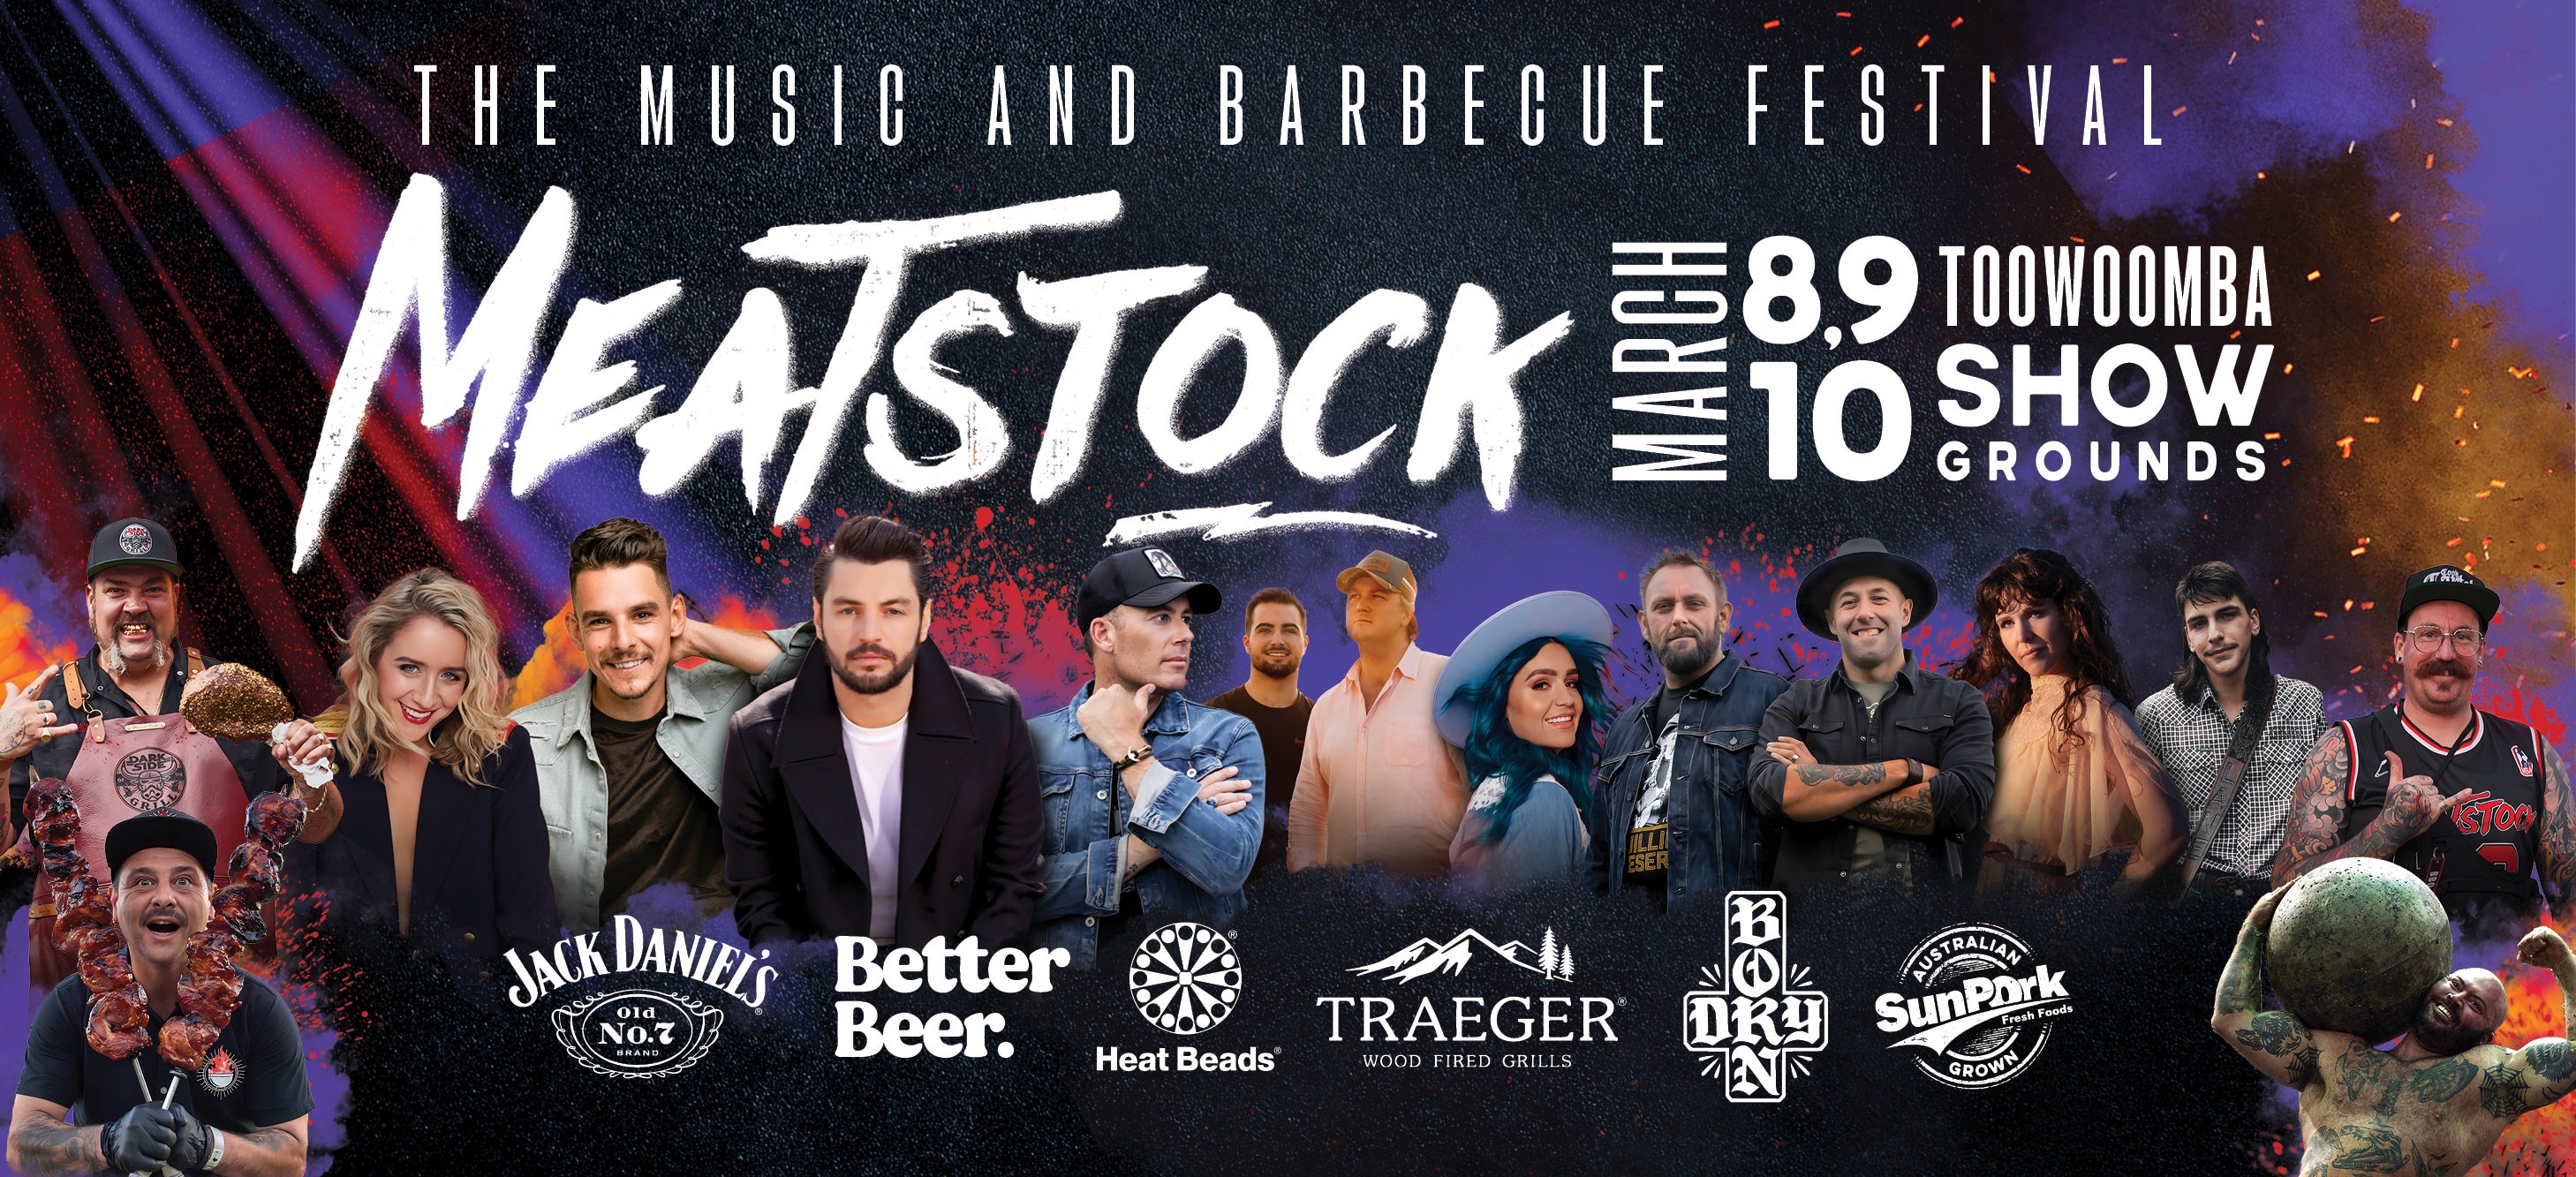 Meatstock Toowoomba - The Music, Barbecue and Camping Festival